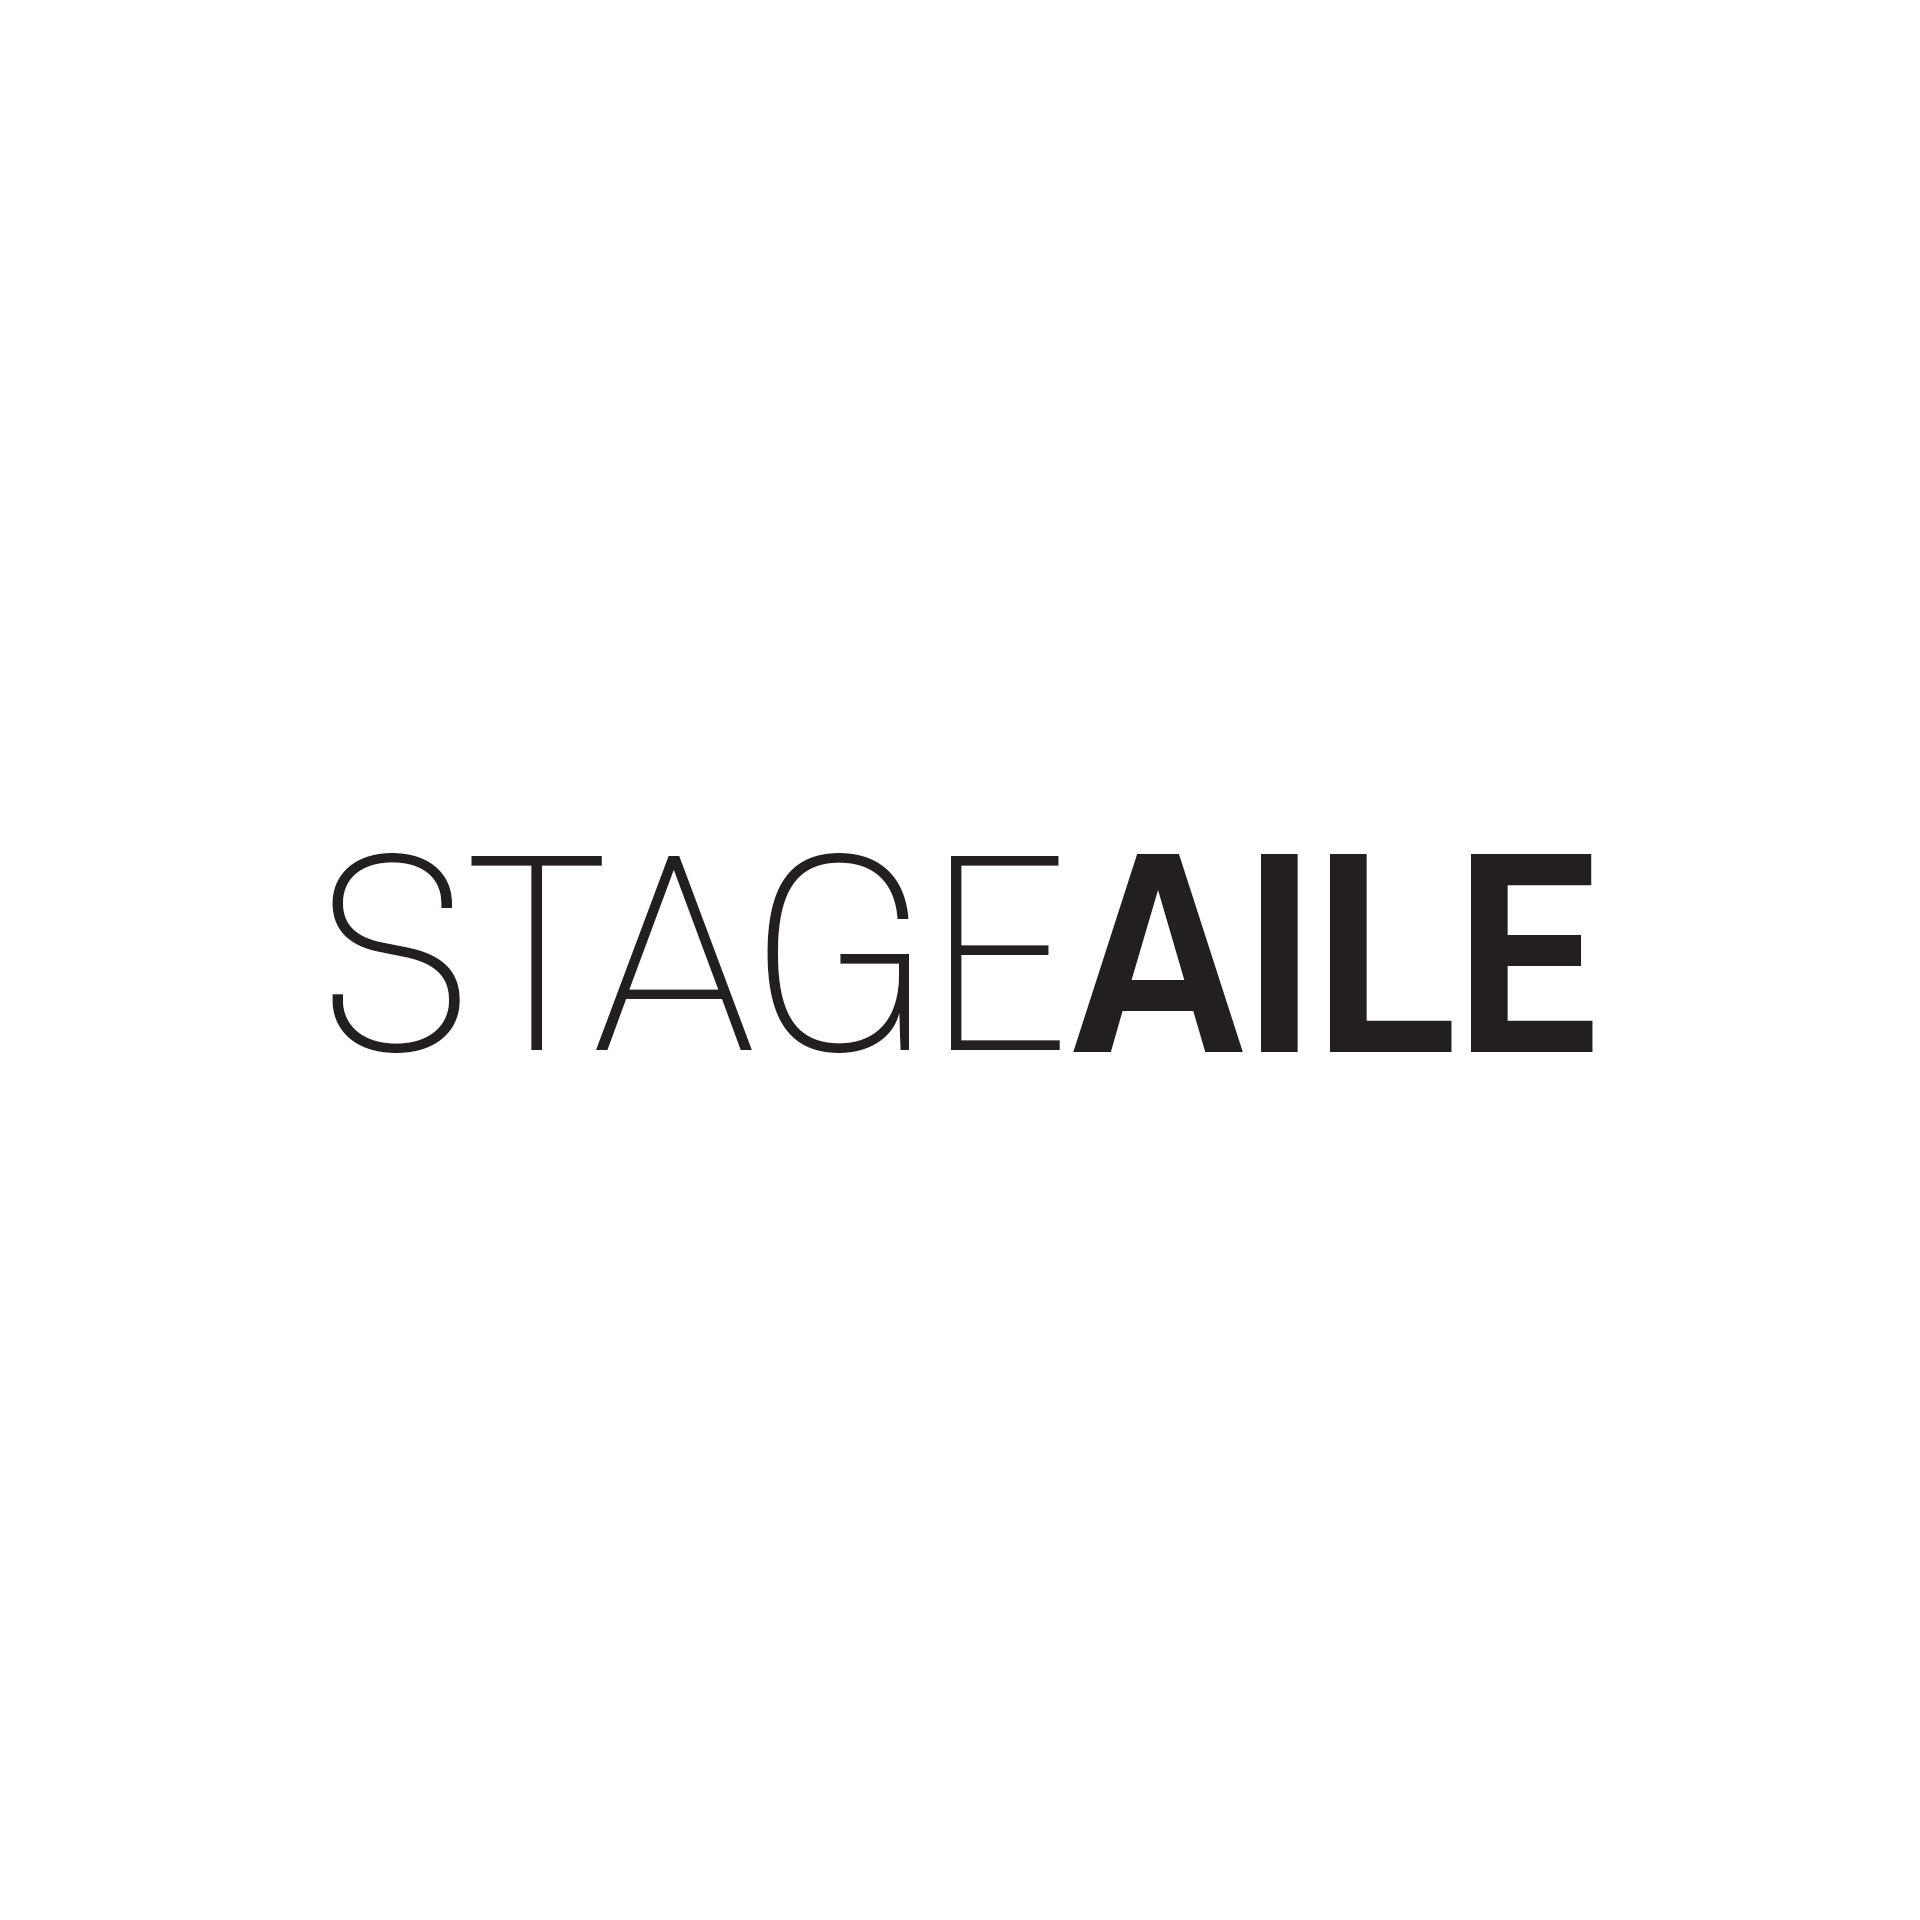 stageaile